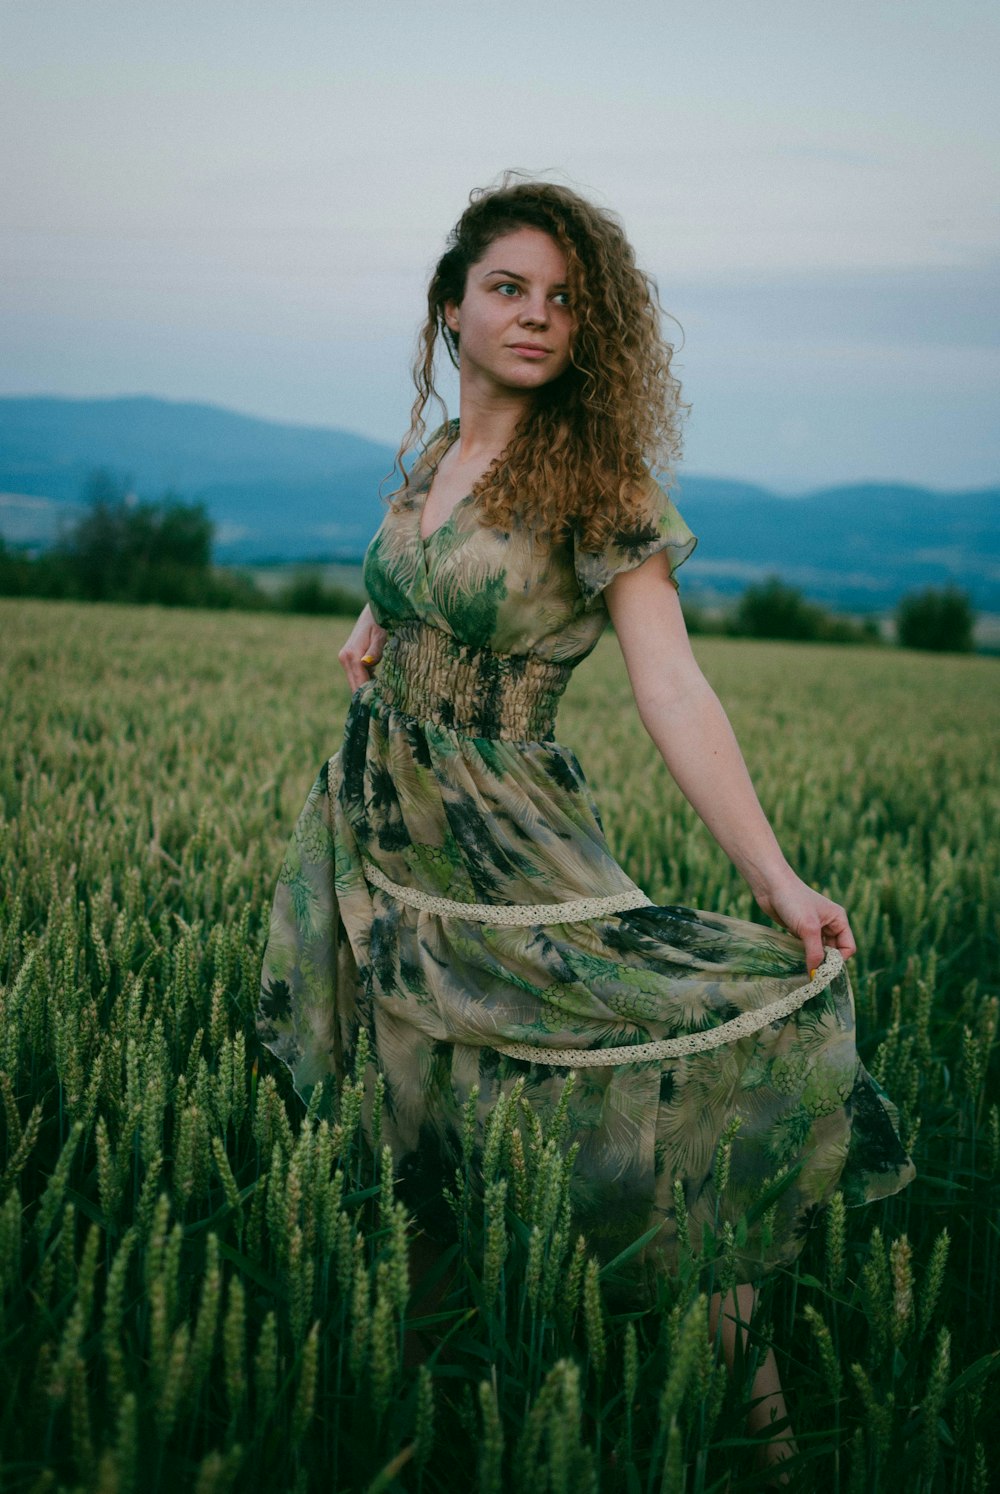 woman in green and brown floral dress standing on green grass field during daytime